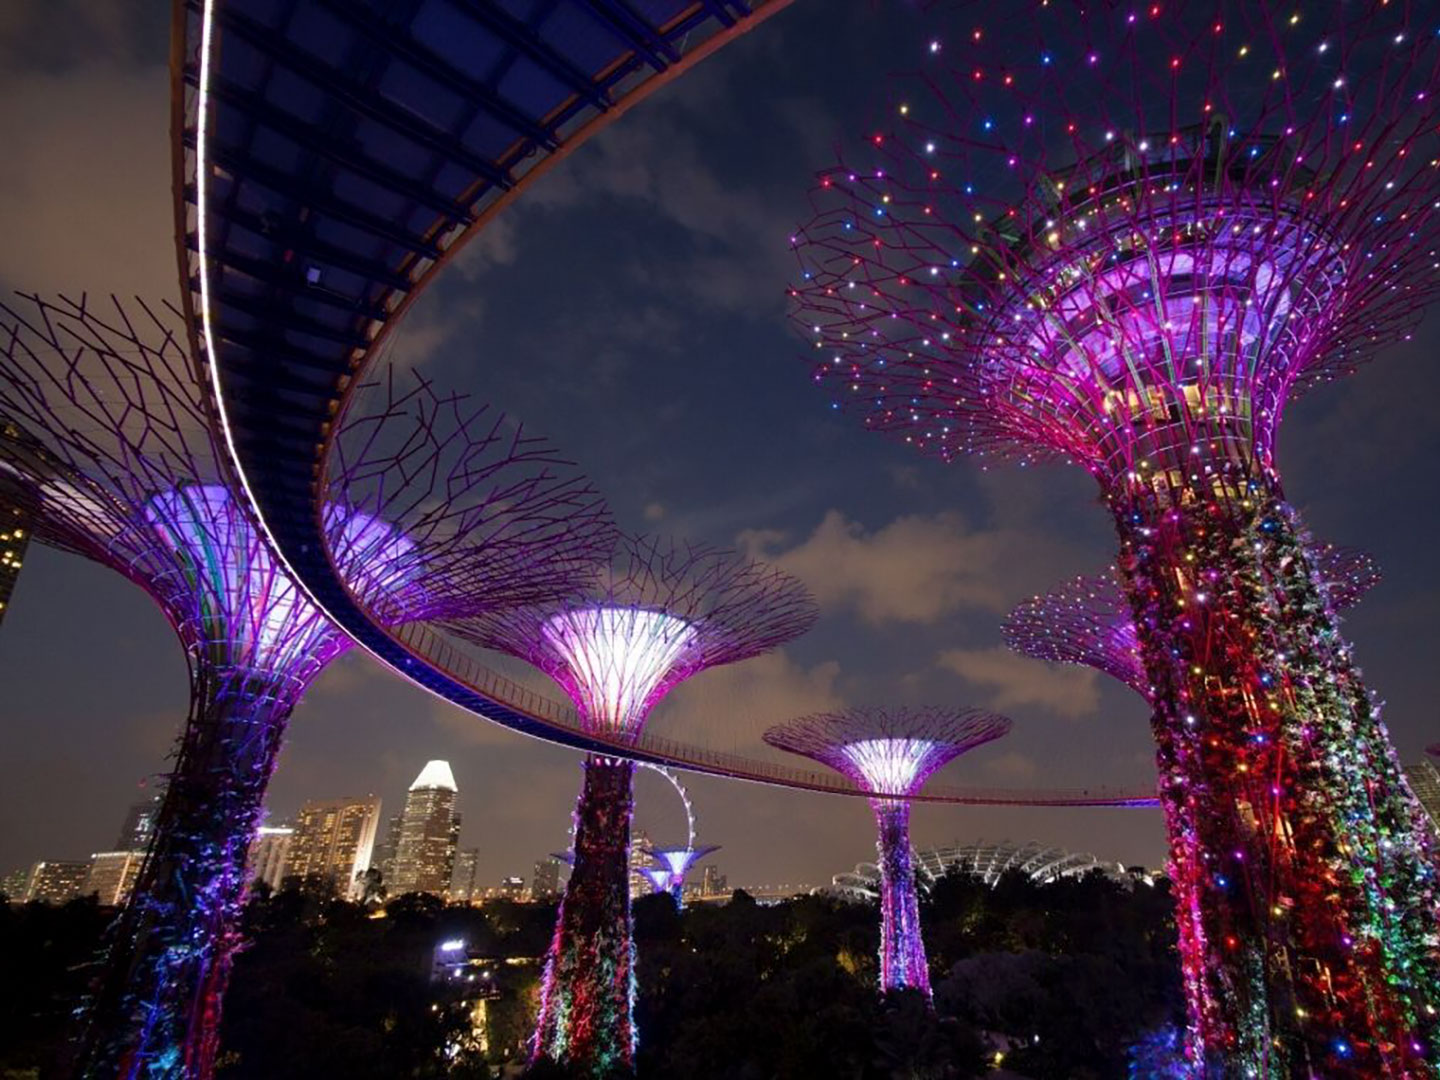 Supertrees lit up at night in Gardens by the Bay Singapore